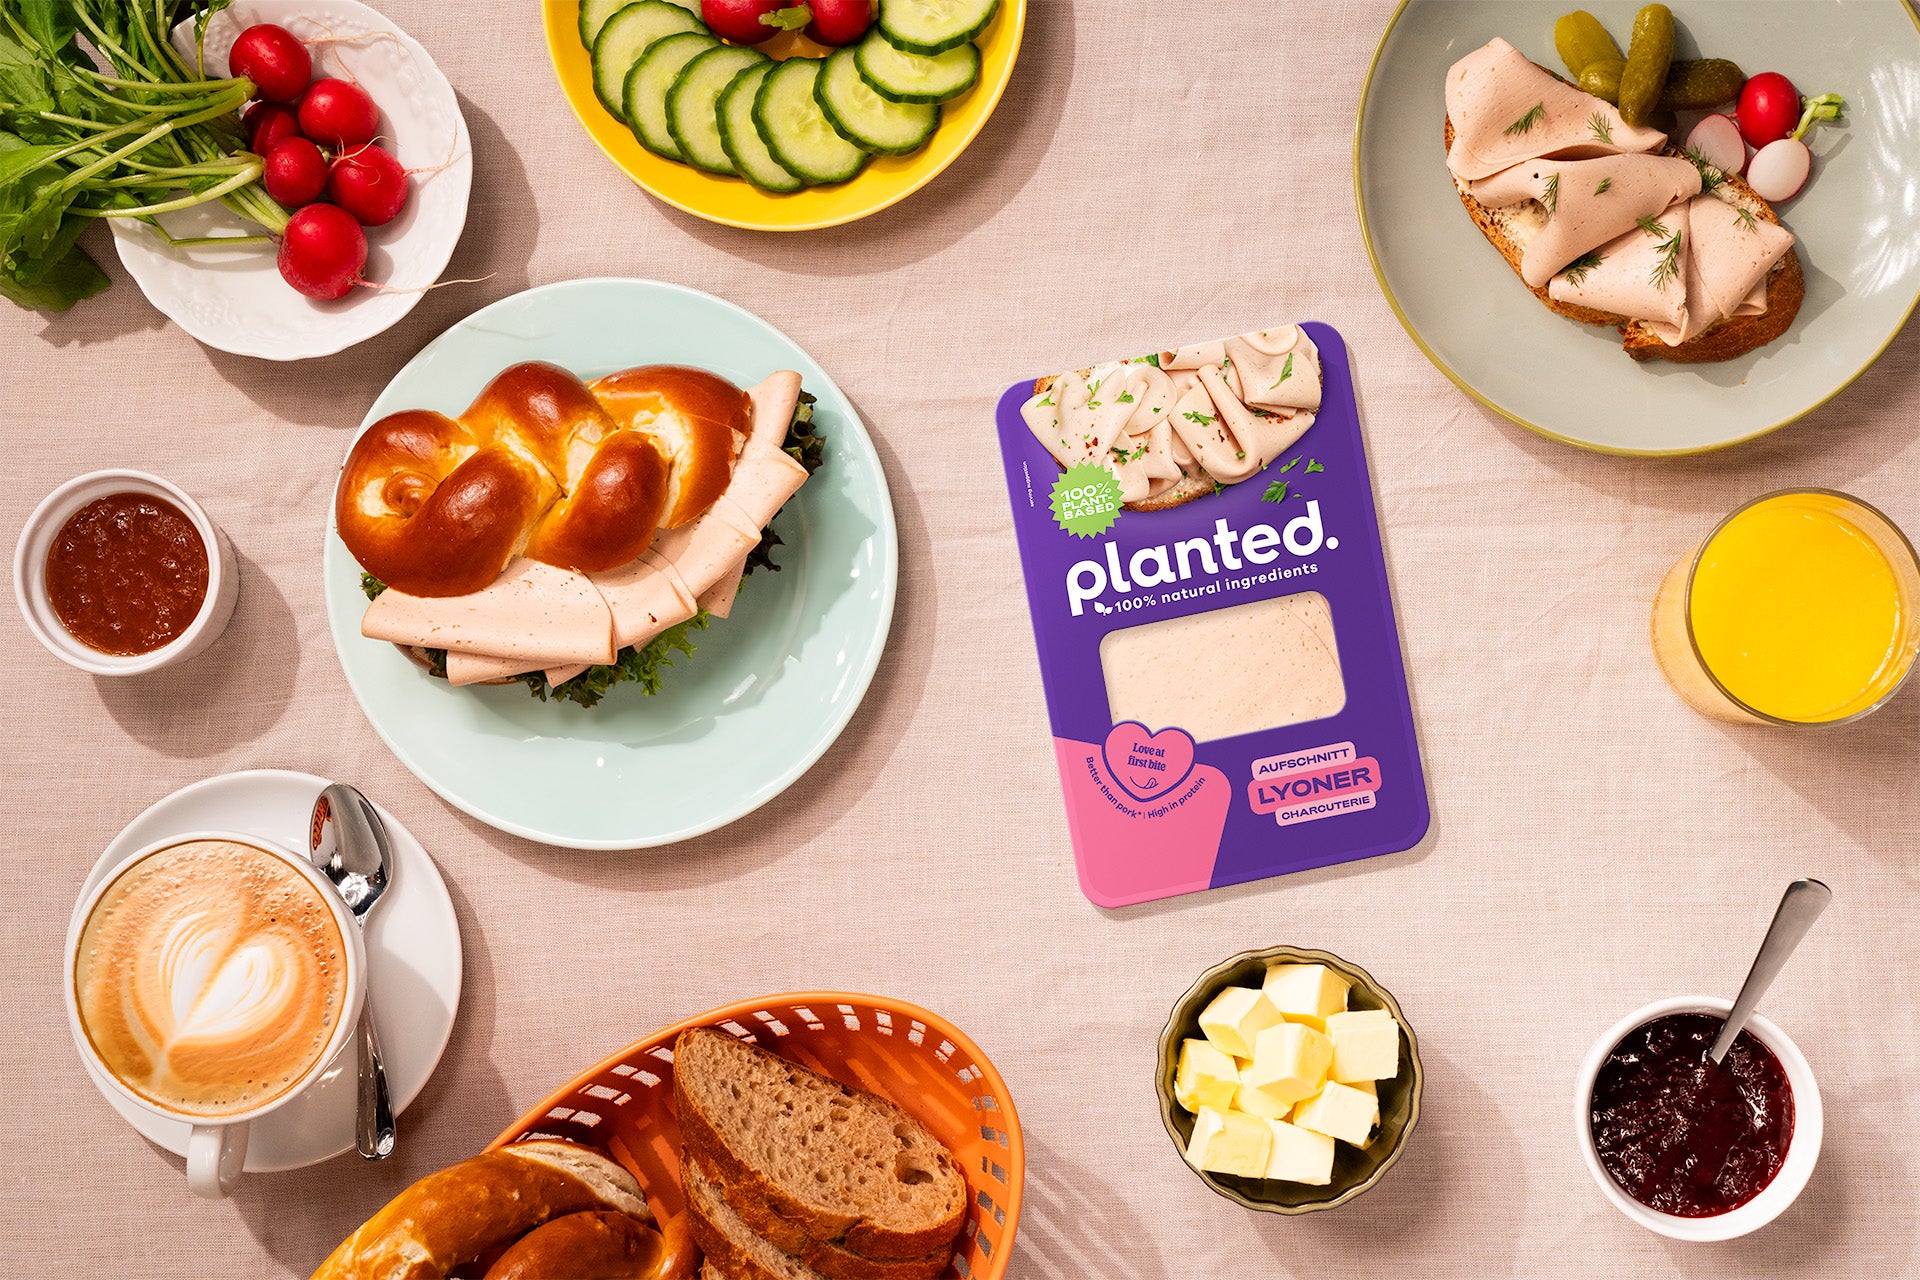 A cold cut without compromise: Planted makes revolutionary waves with its first cold cut